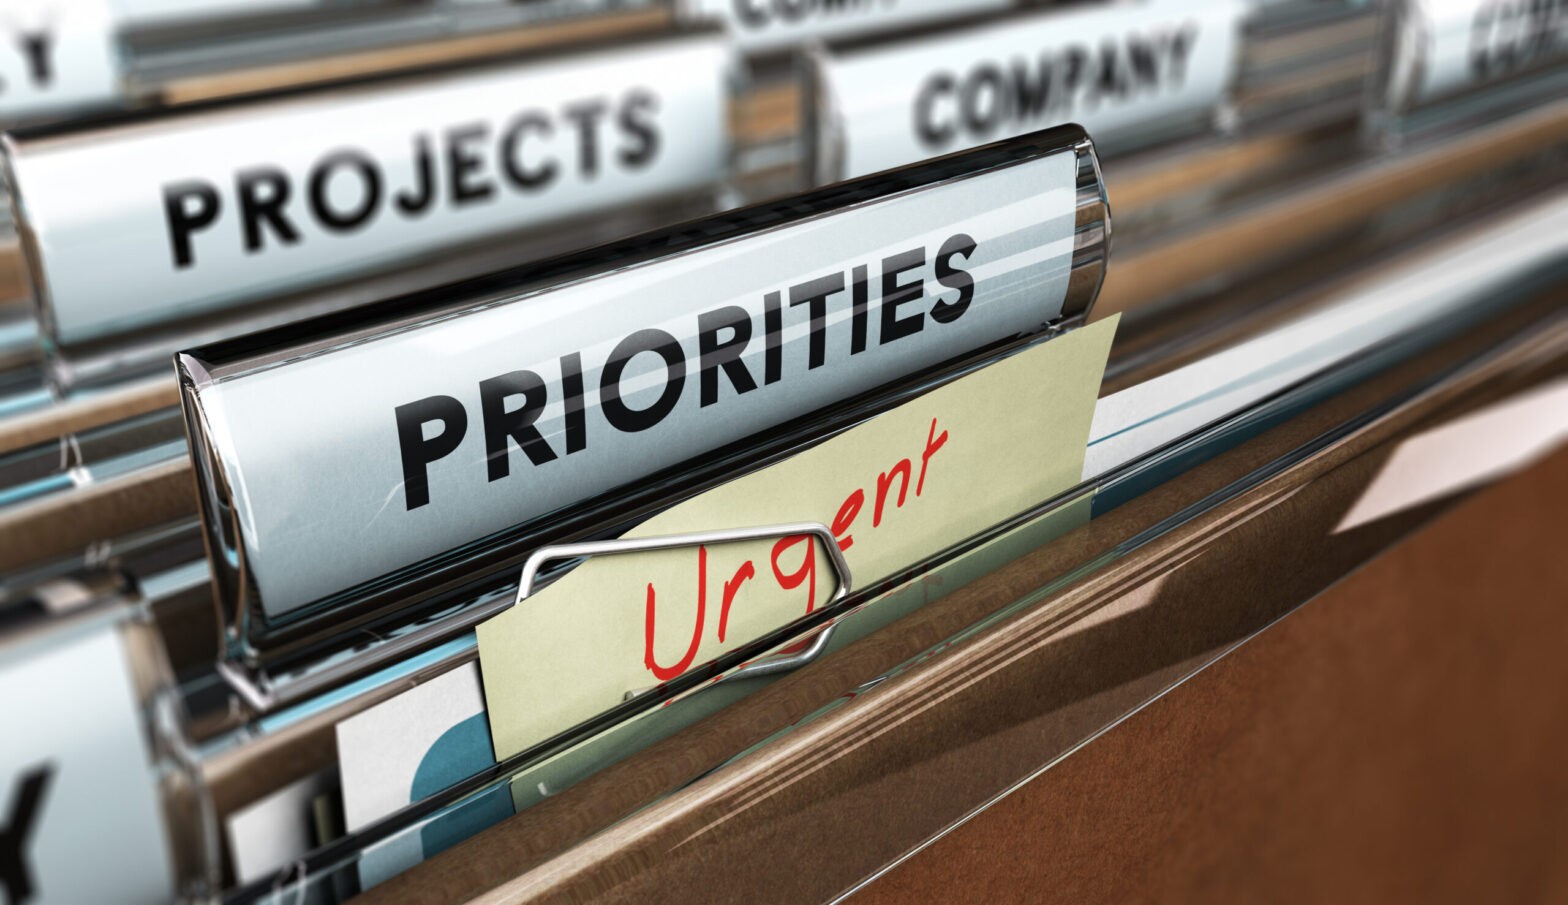 Featured image for post: HR Priorities Are Misplaced